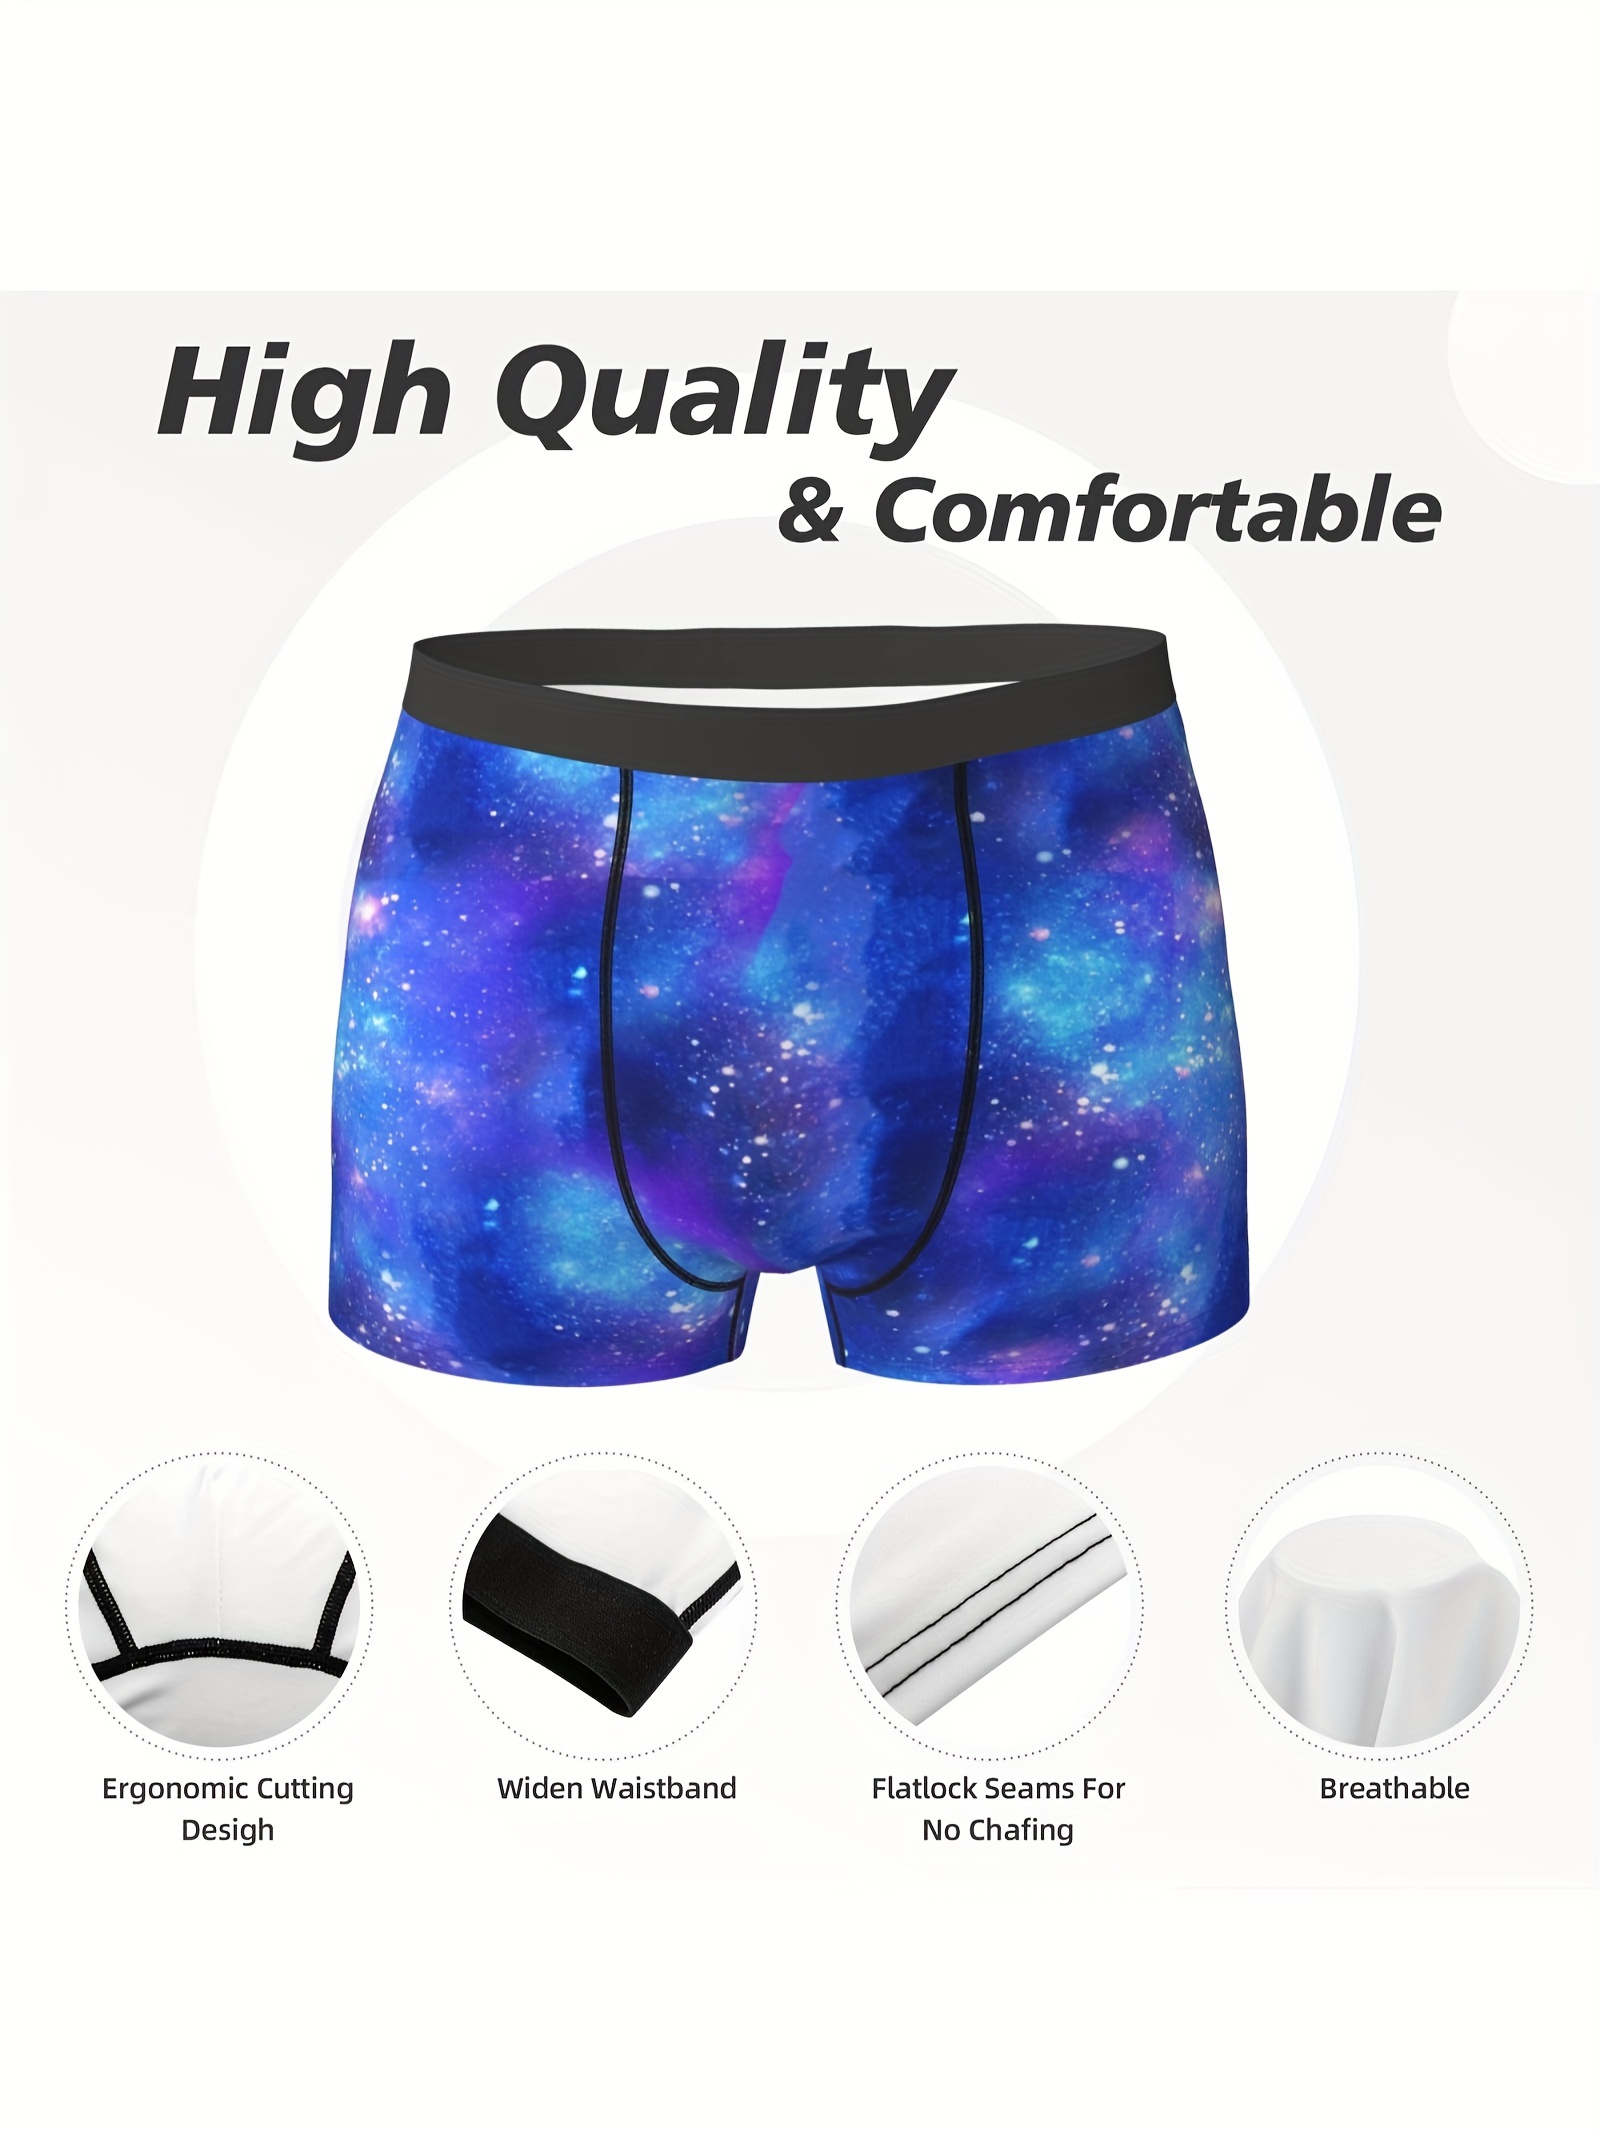 Stylish active and innerwear that spells comfort